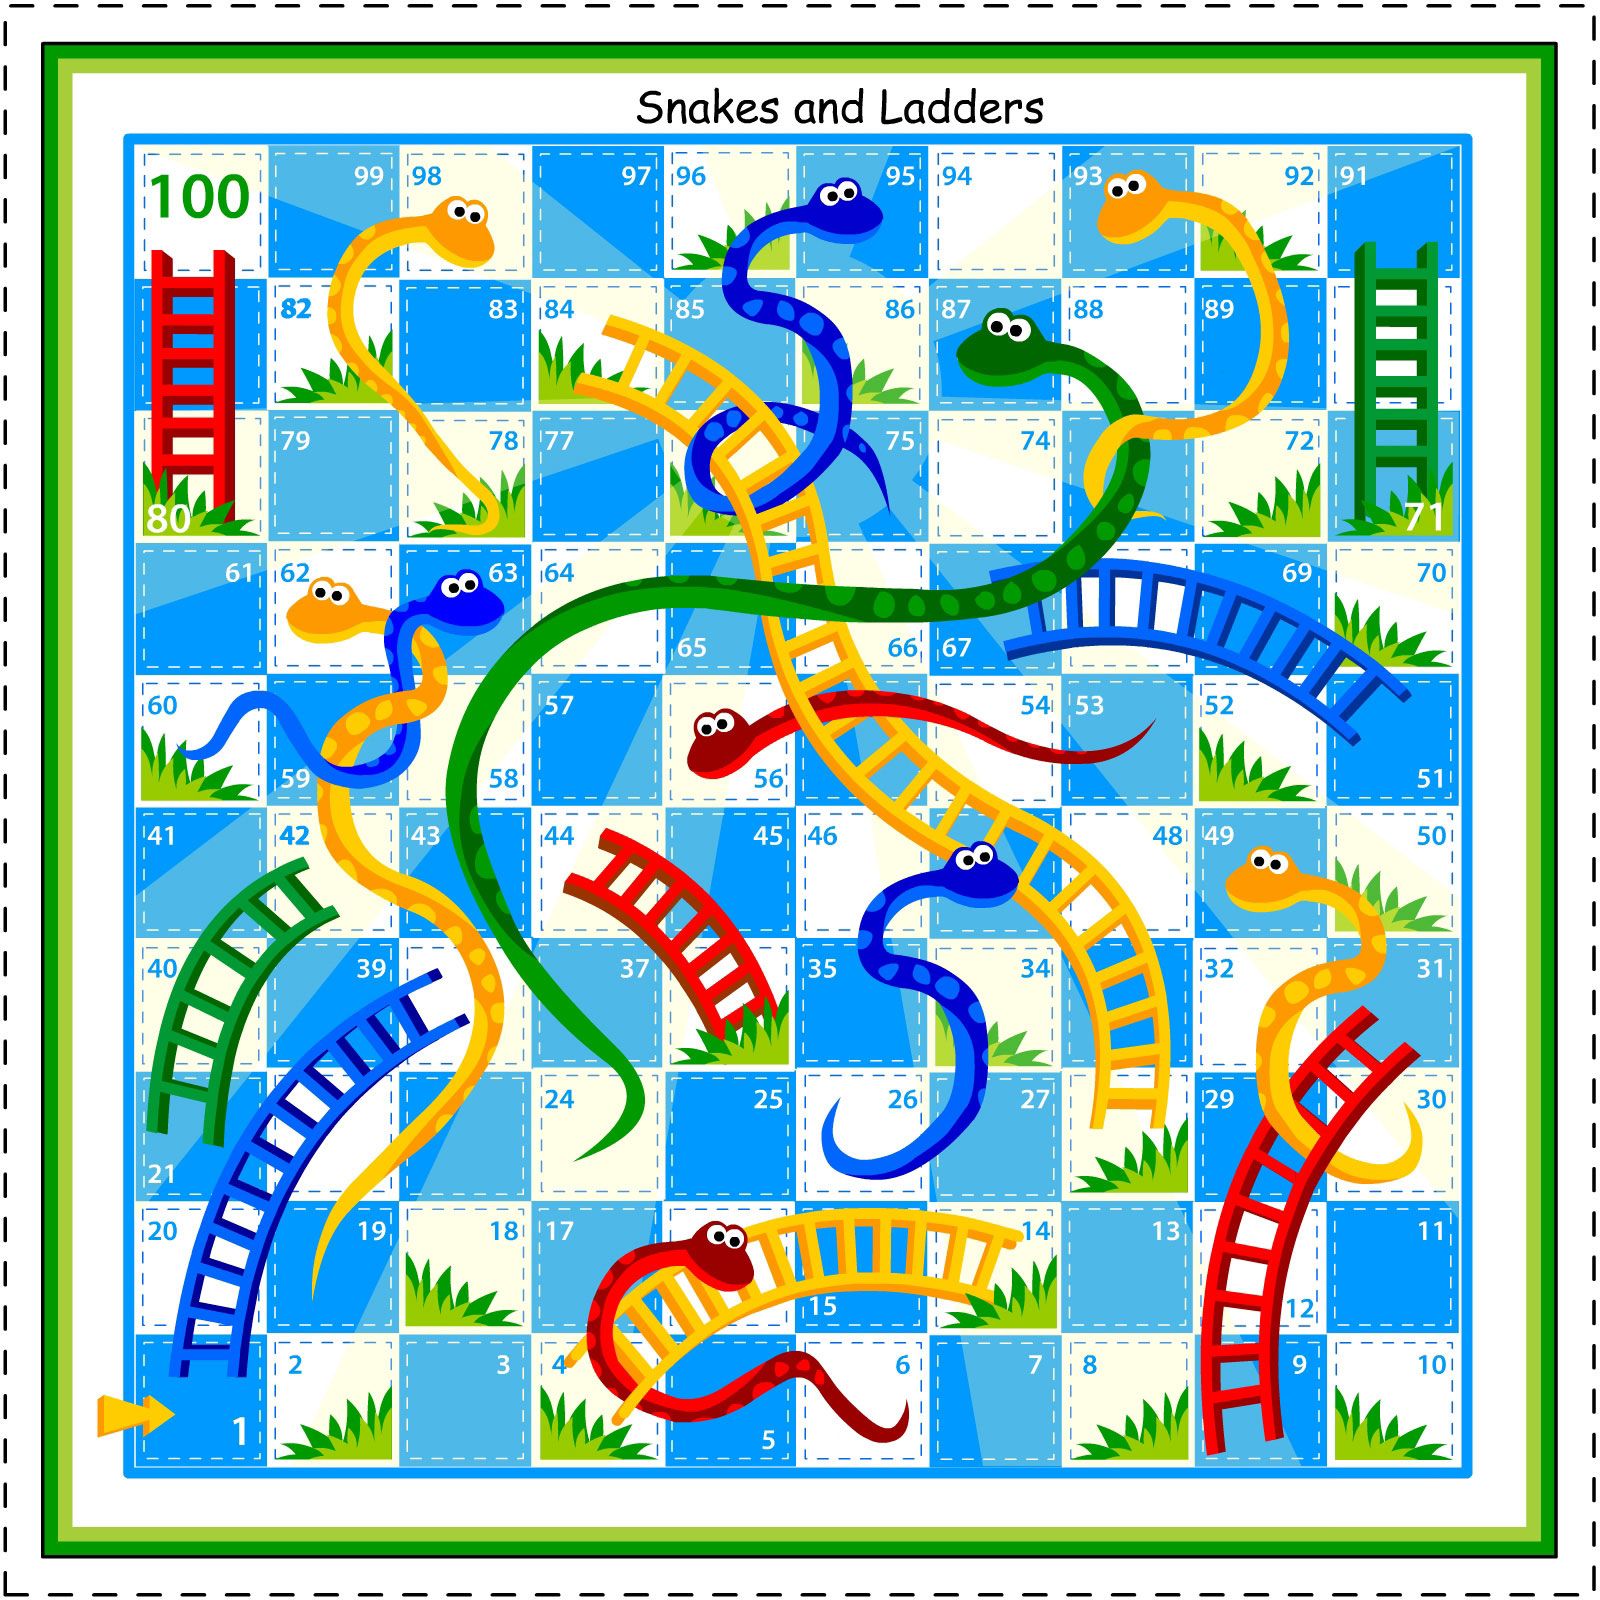 Snakes and ladders game instructions